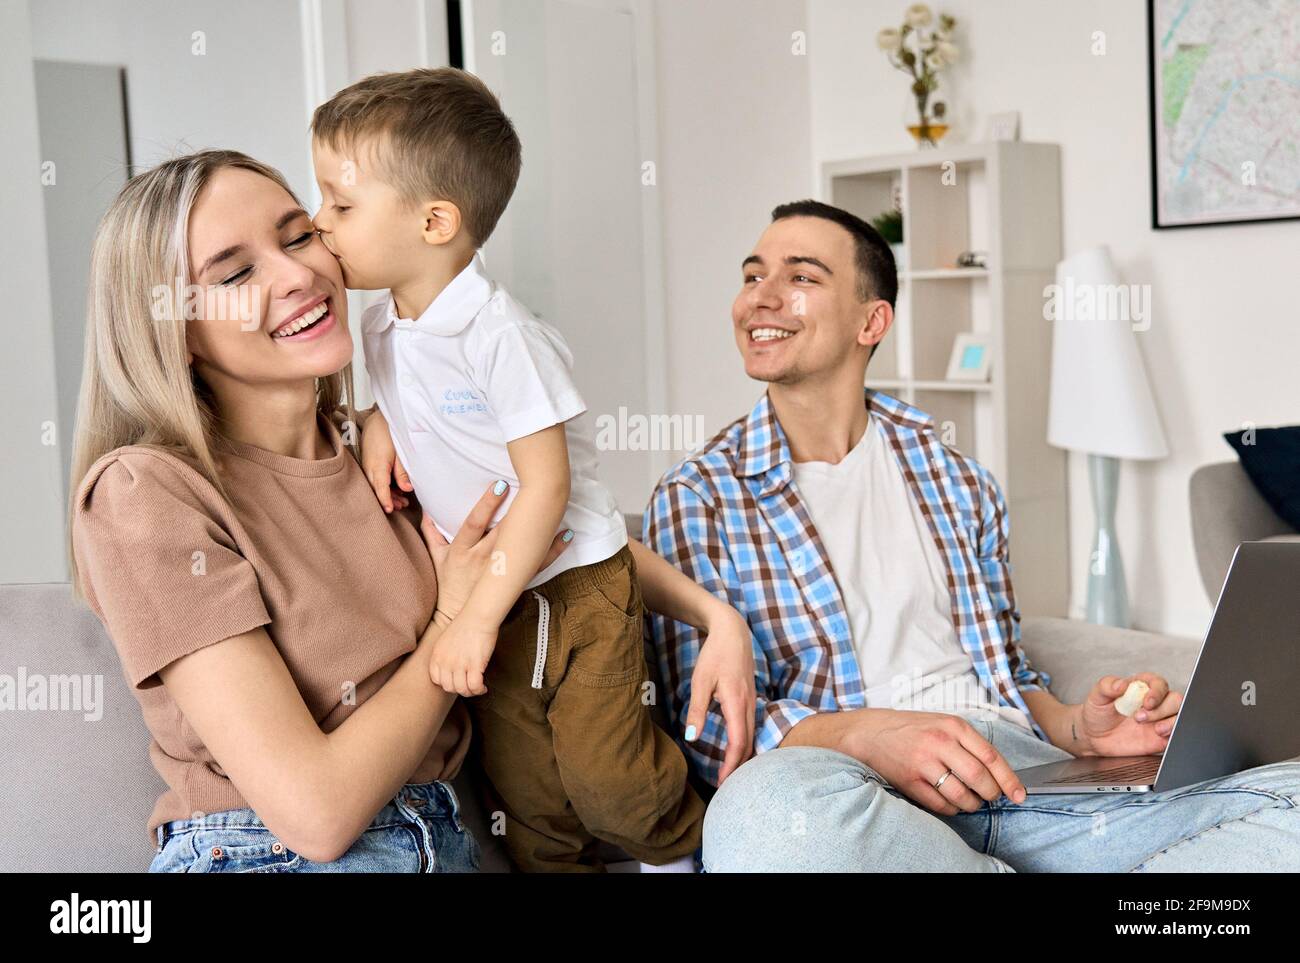 Cute toddler child son kissing dad on cheek having fun at home. Stock Photo